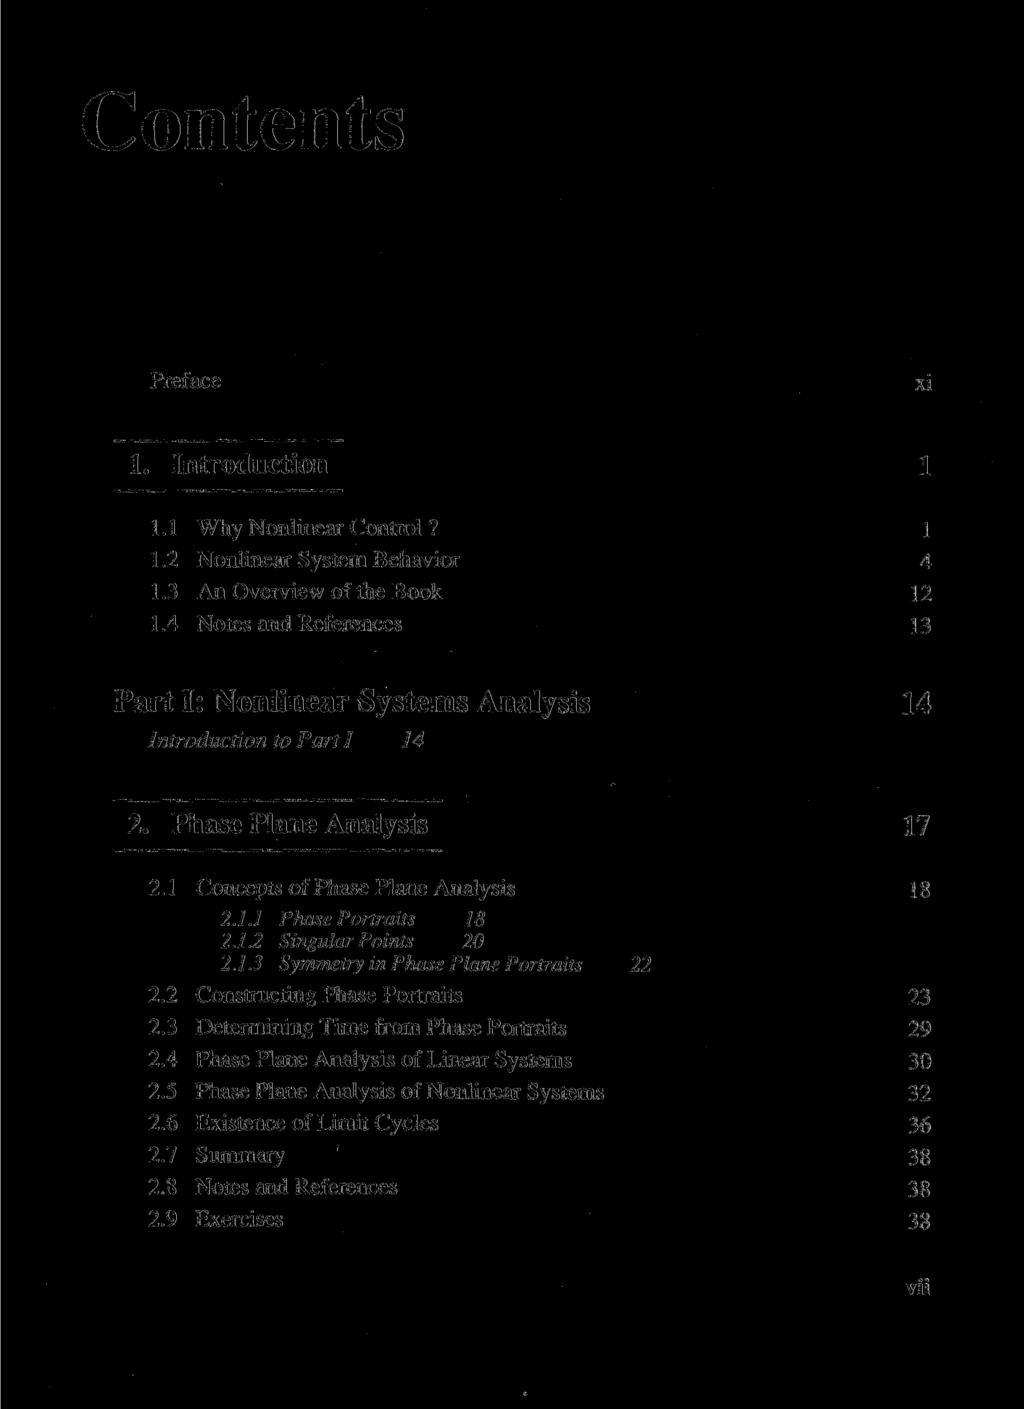 Contents Preface xi 1. Introduction 1 1.1 Why Nonlinear Control? 1 1.2 Nonlinear System Behavior 4 1.3 An Overview of the Book 12 1.